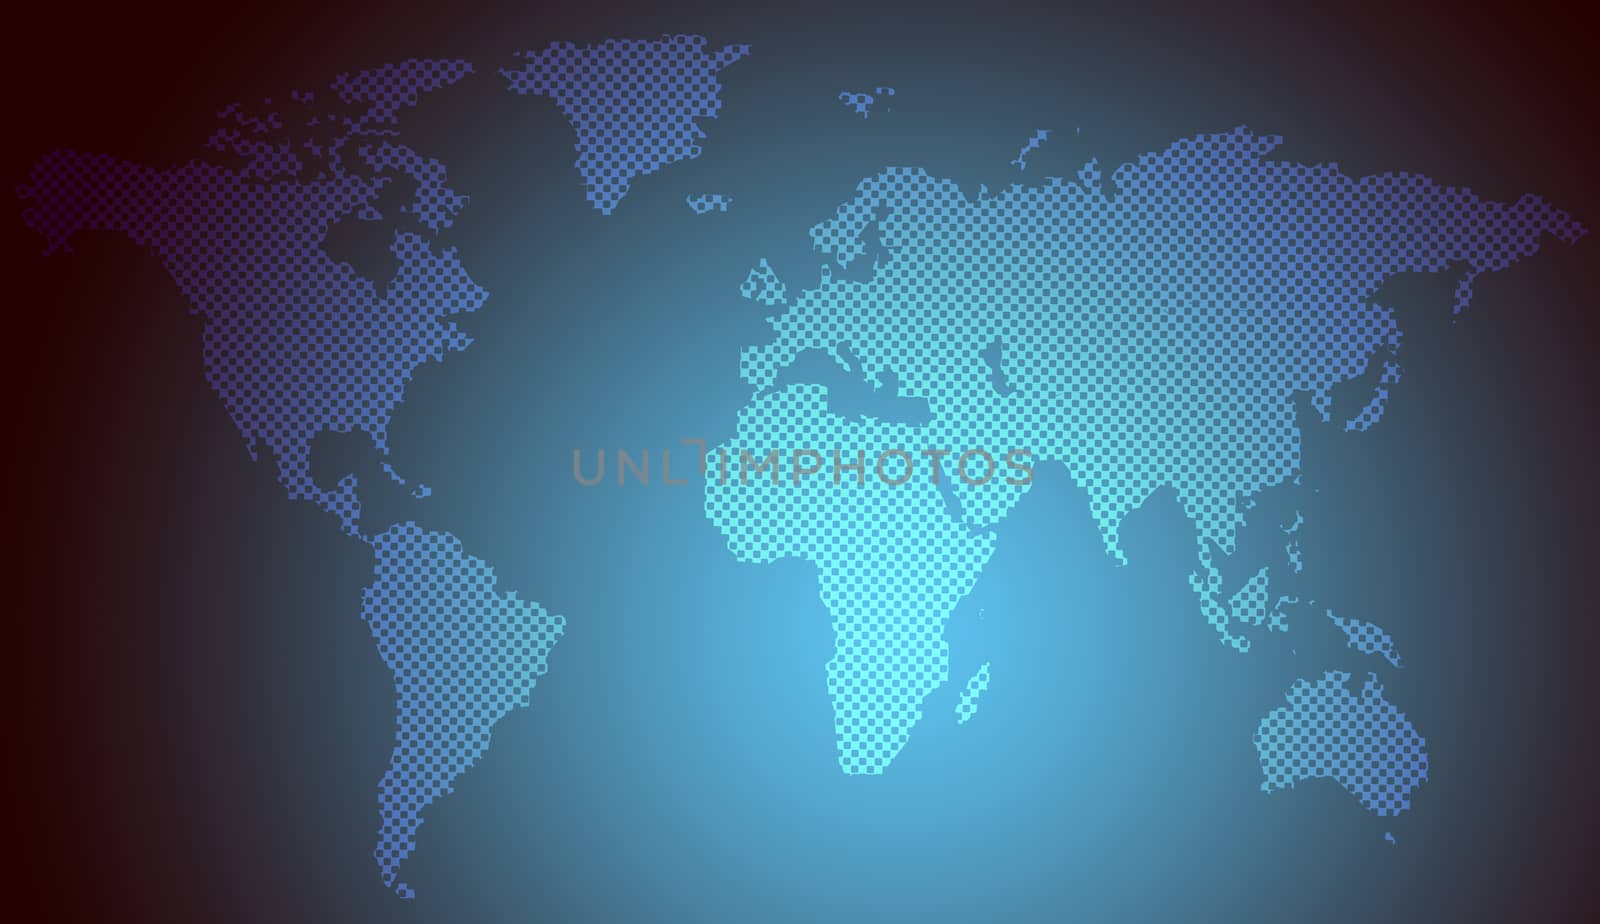 Abstract blue background with world map and light